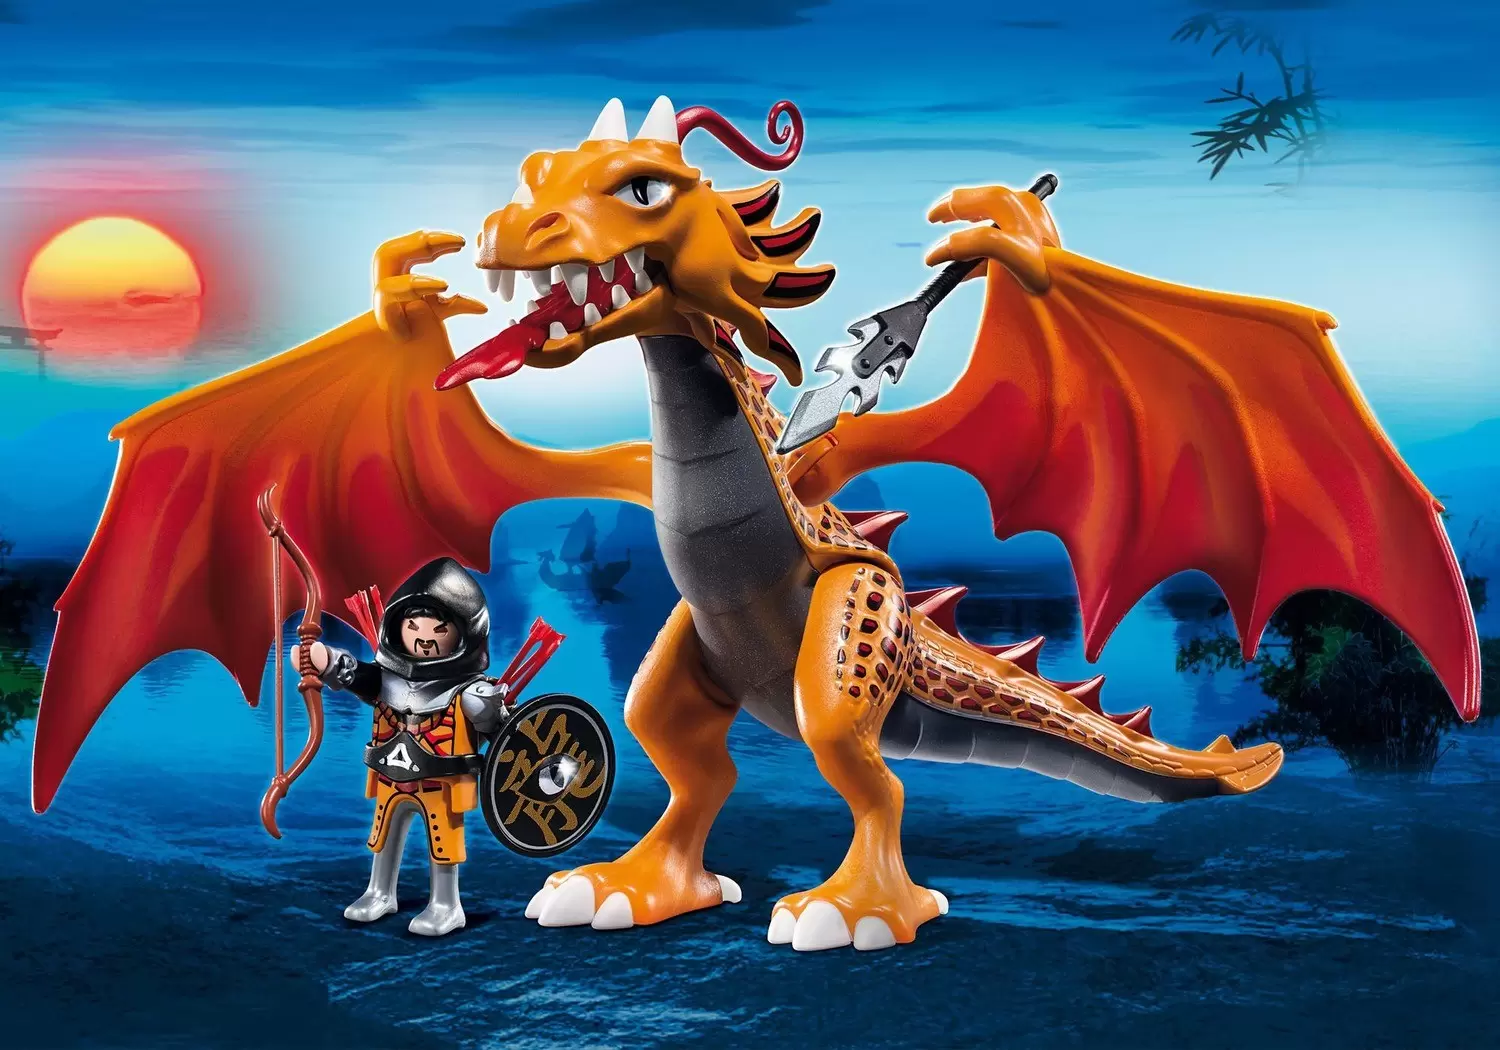 Playmobil Middle-Ages - Fire dragon